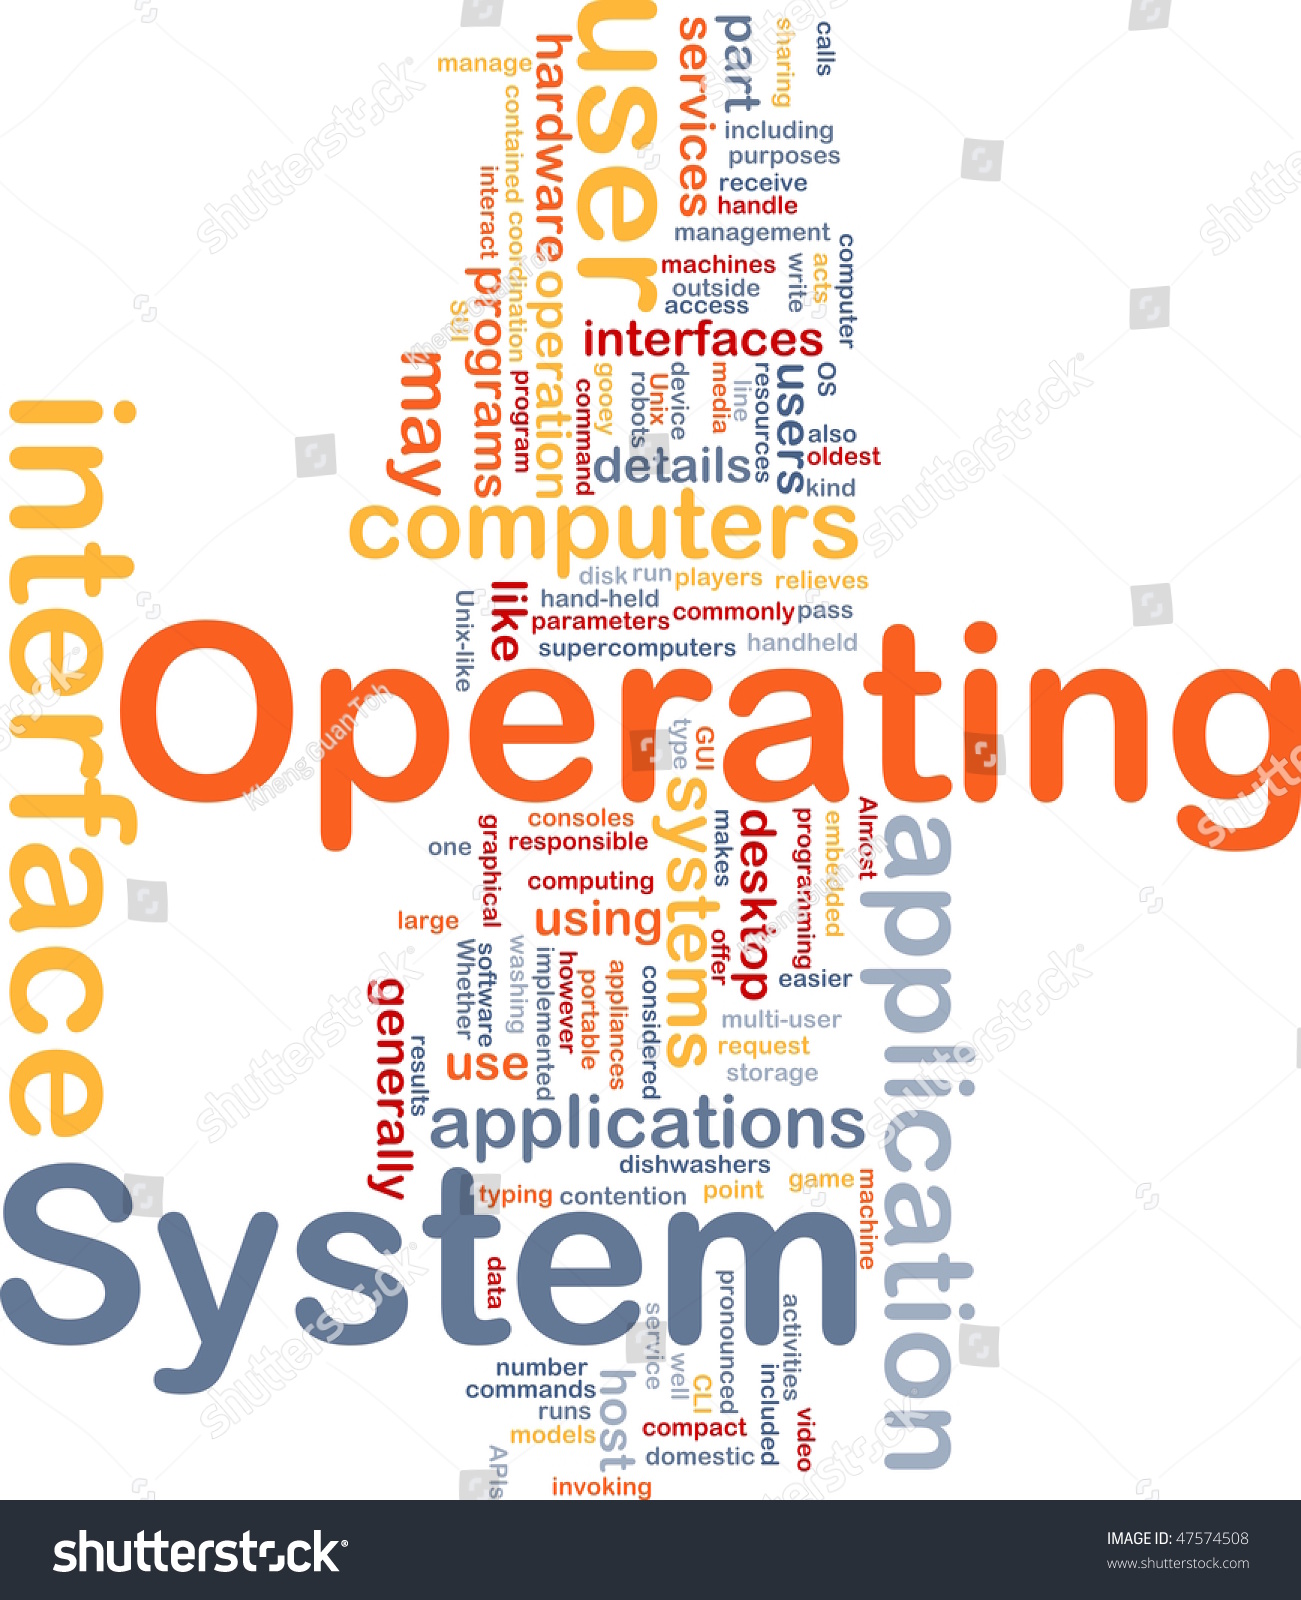 Word Cloud Concept Illustration Of Operating System - 47574508 ...